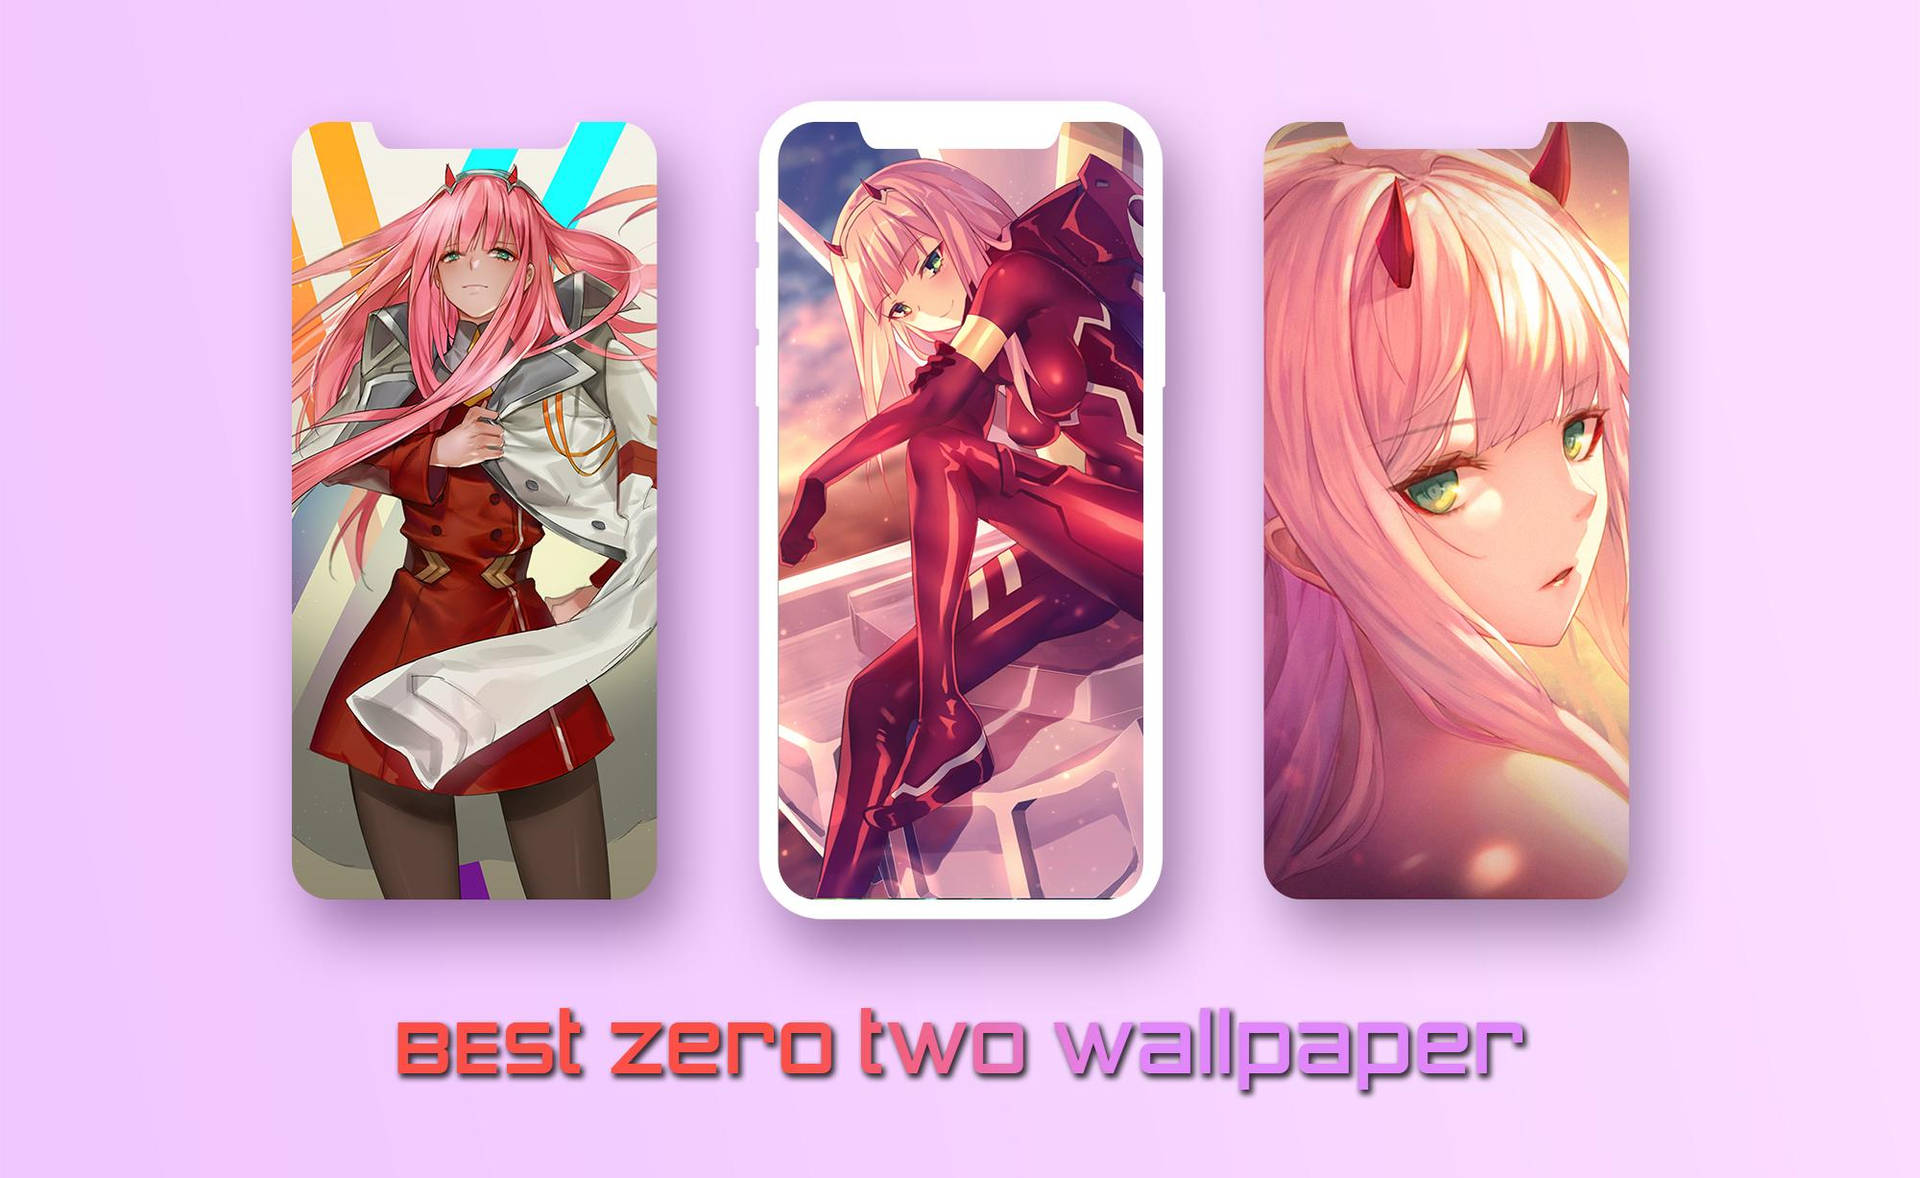 The Darling of the Star-Crossed Lovers, Zero Two Wallpaper